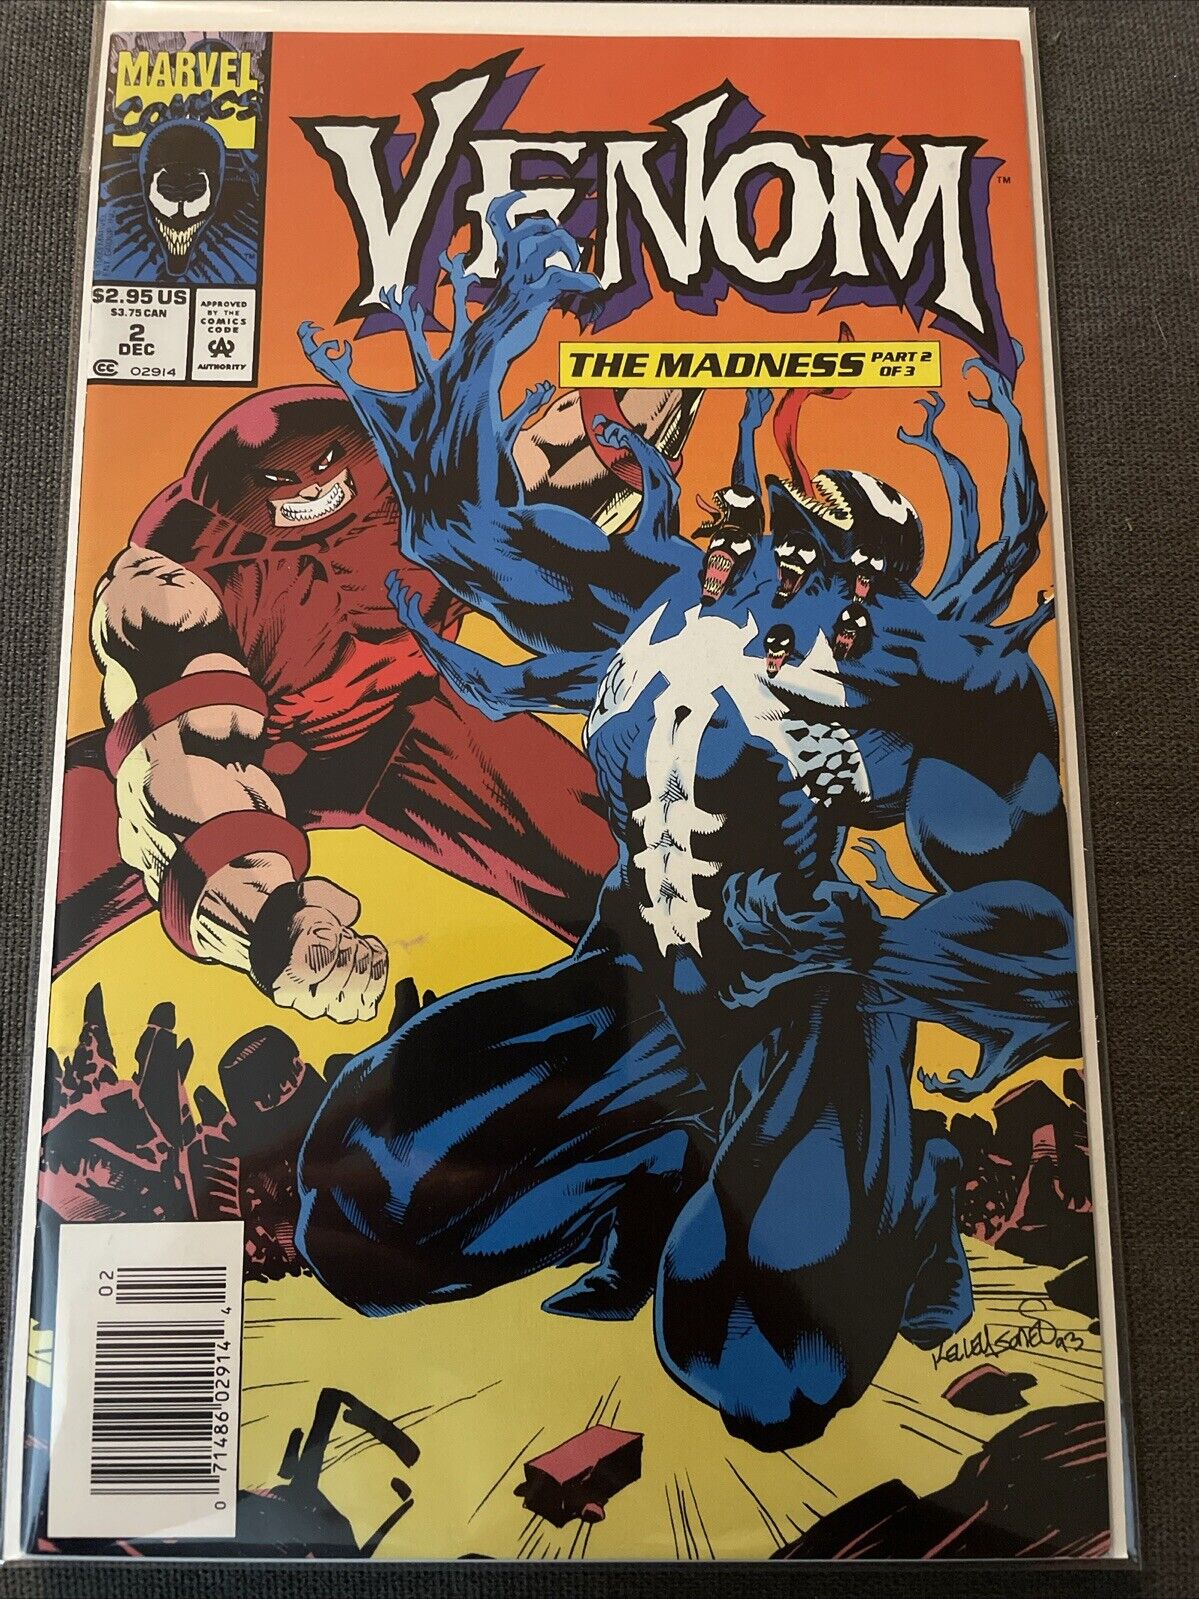 Marvel - VENOM: THE MADNESS #2 (Great Condition) bagged and boarded